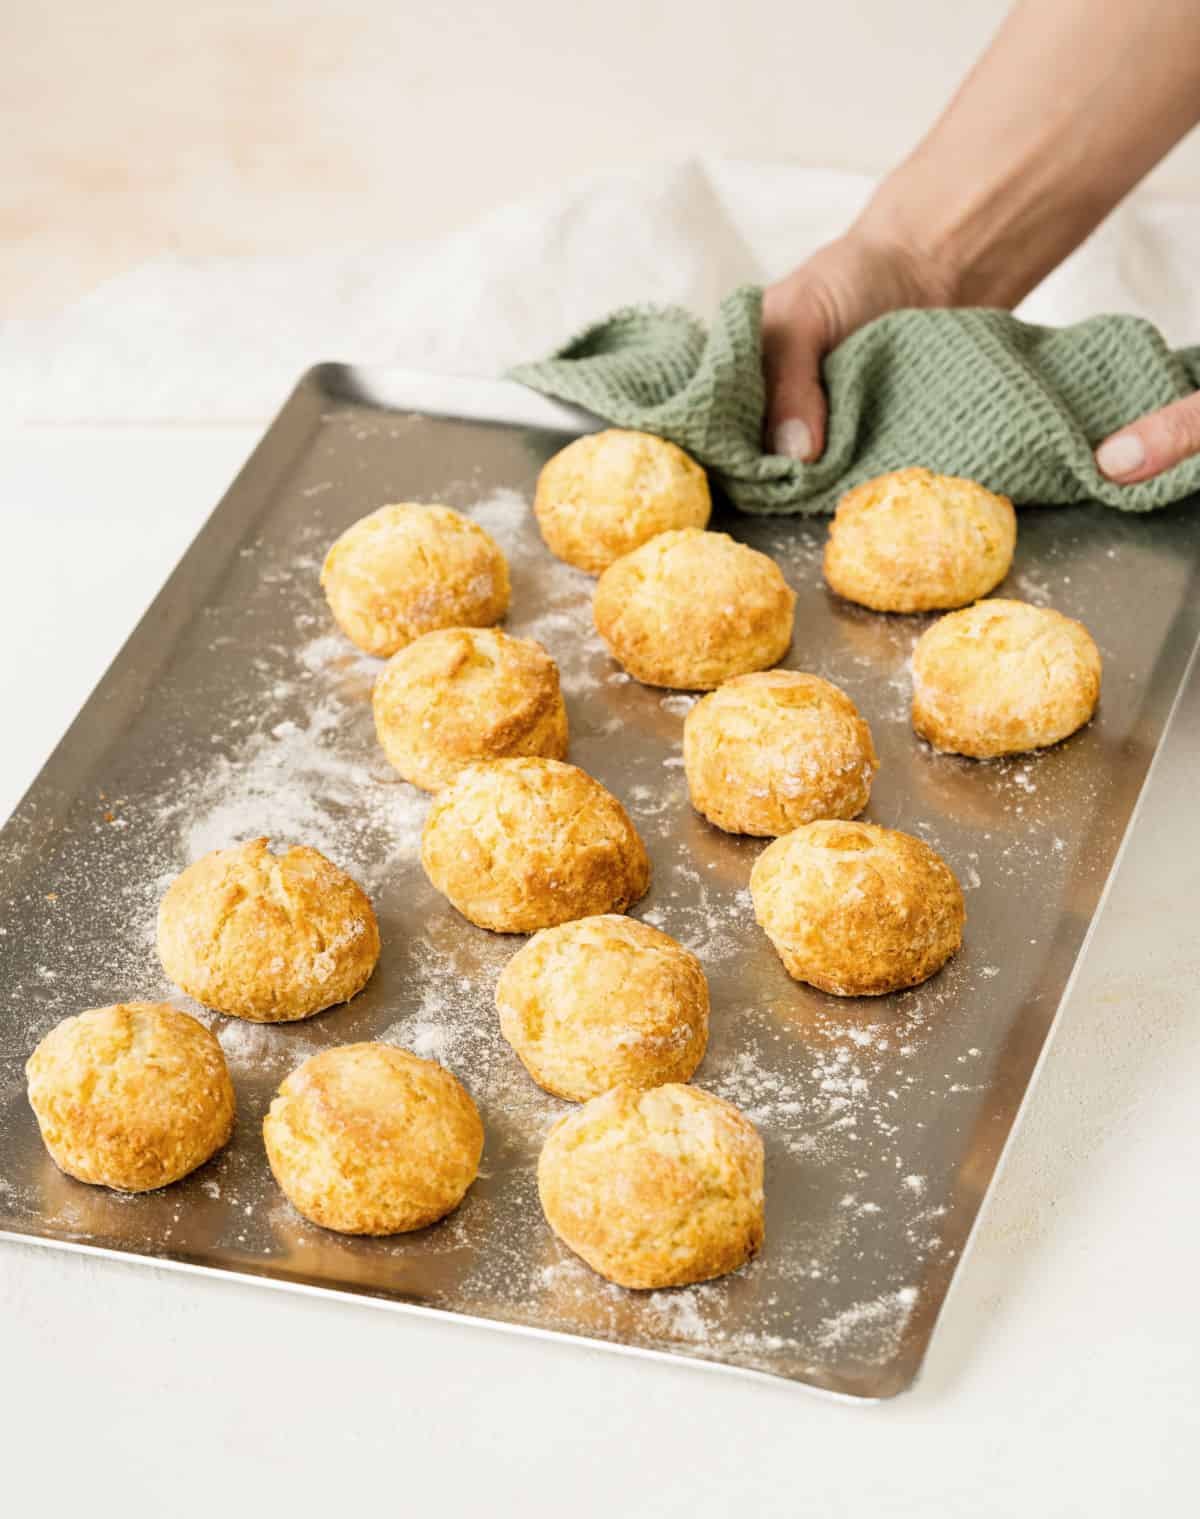 Baked scones on a baking sheet on a white surface. A hand holding it with a green towel.